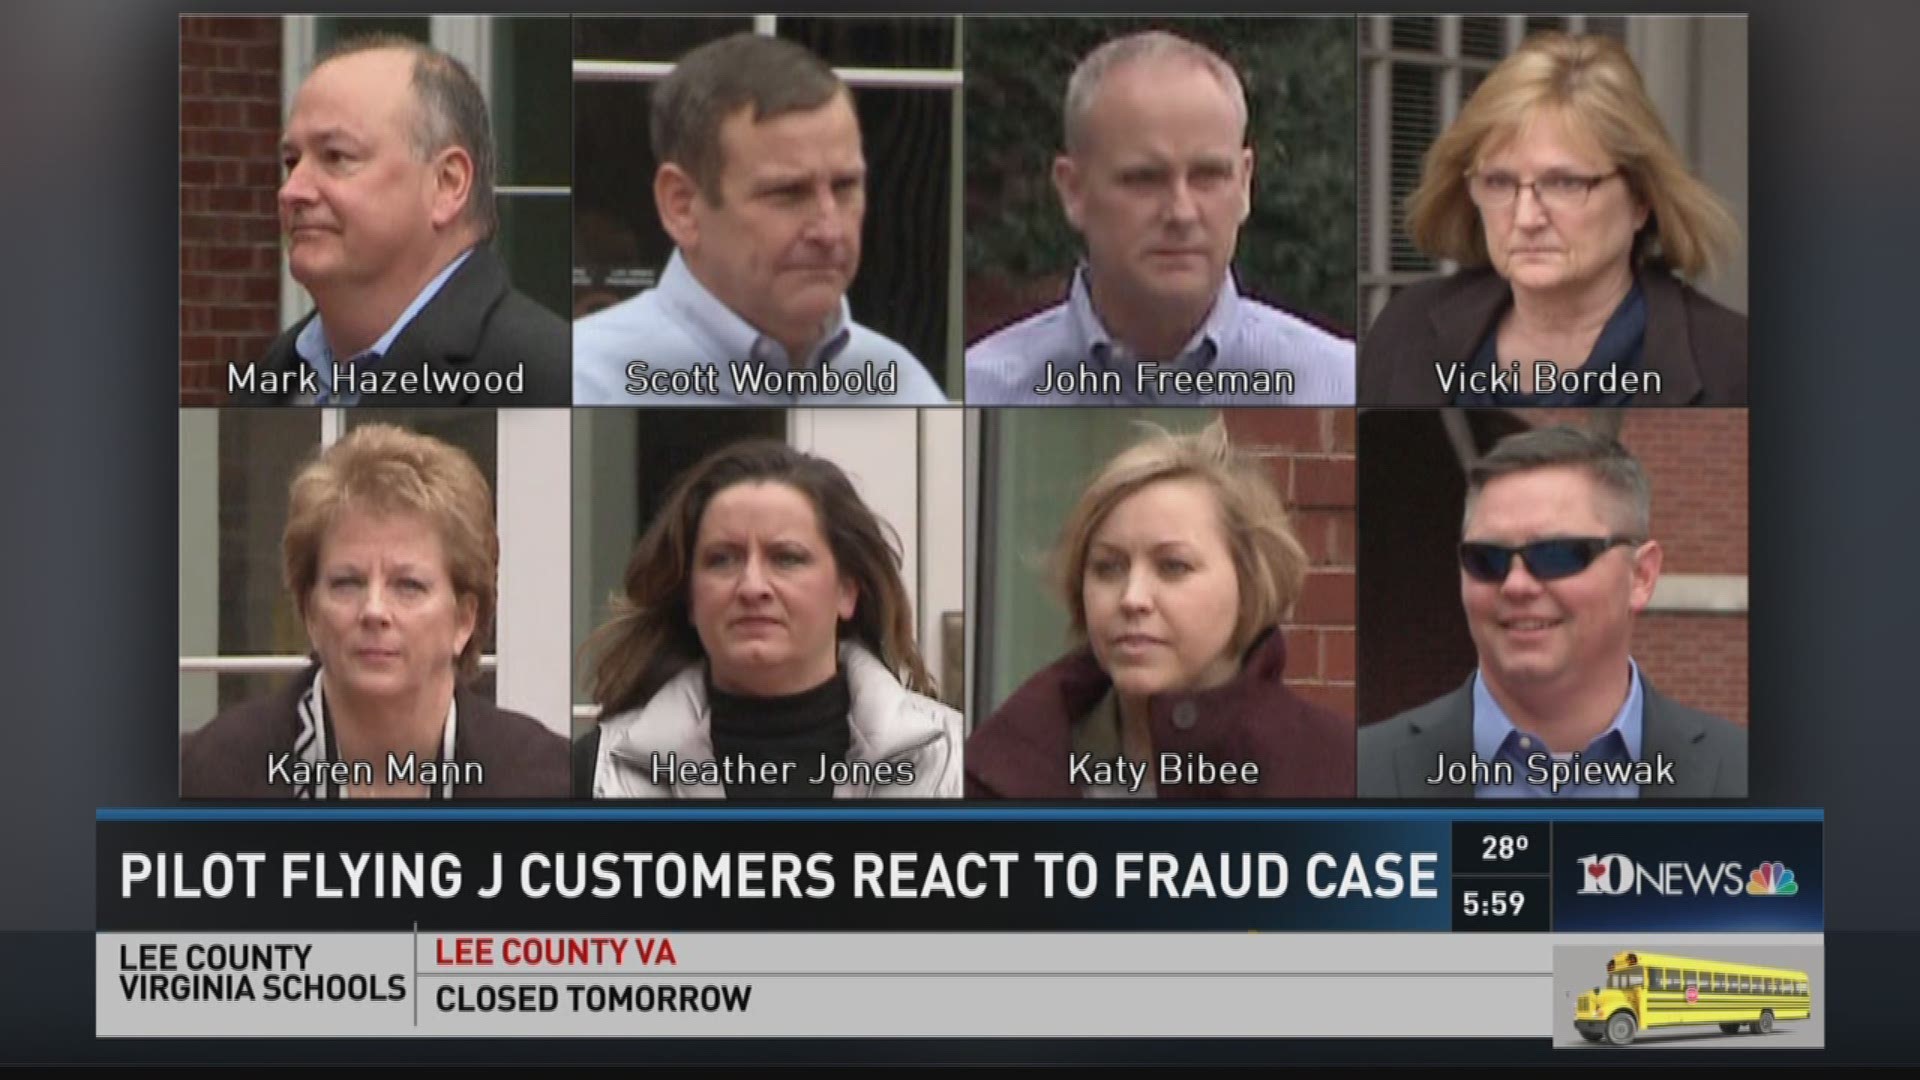 February 9, 2016 at 6 p.m. victims of the Pilot Flying J rebate scheme react to most recent indictments.